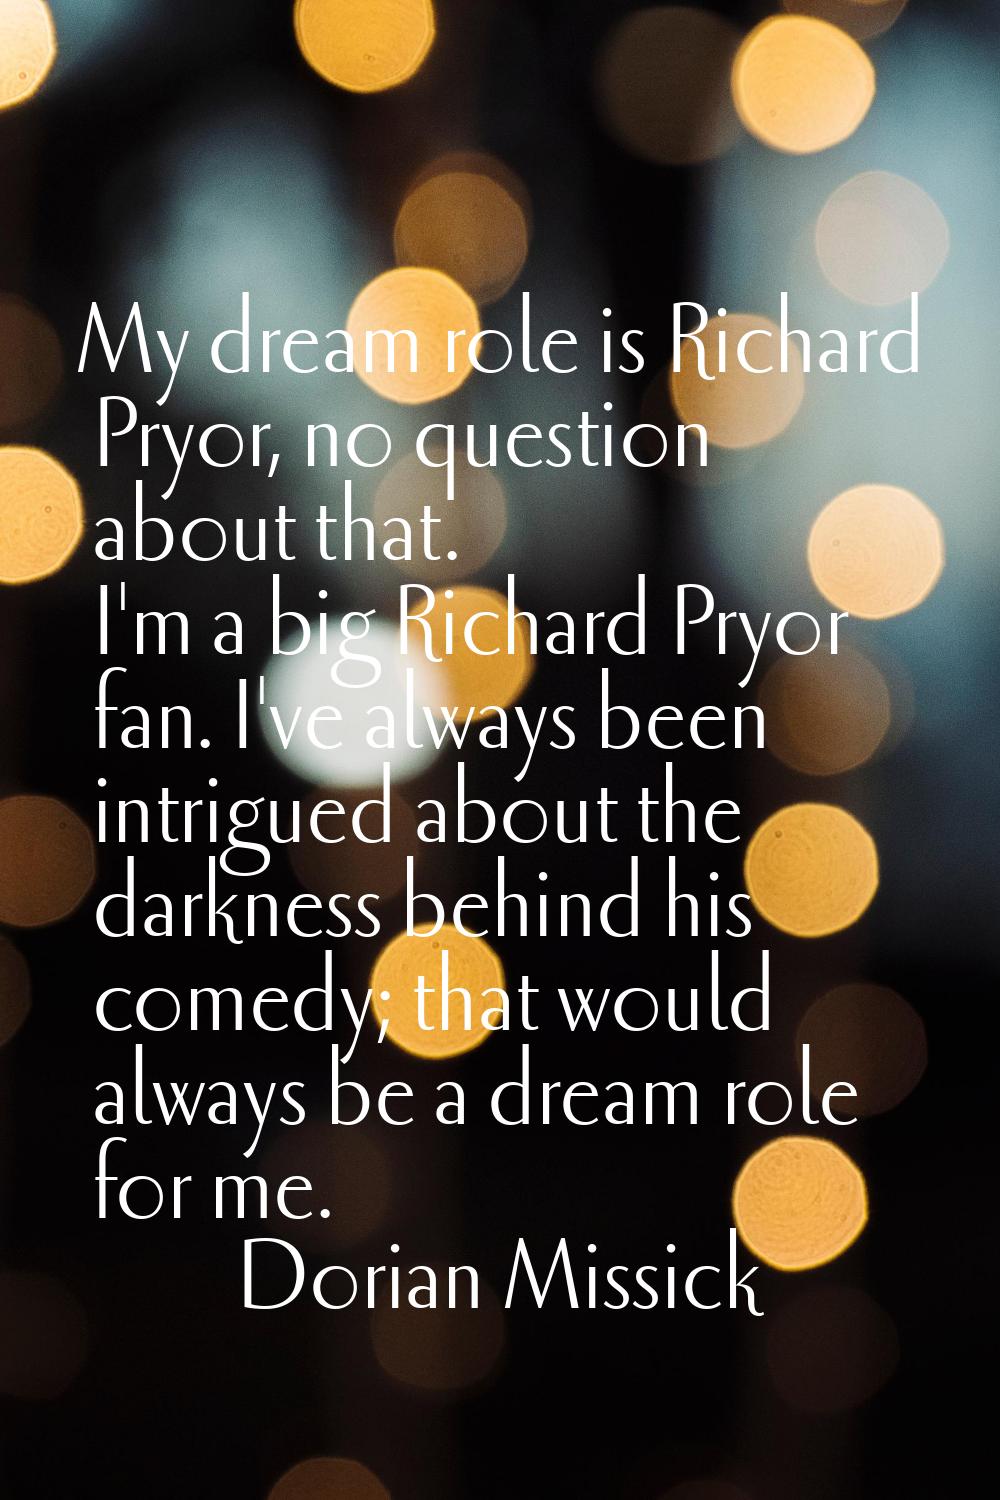 My dream role is Richard Pryor, no question about that. I'm a big Richard Pryor fan. I've always be